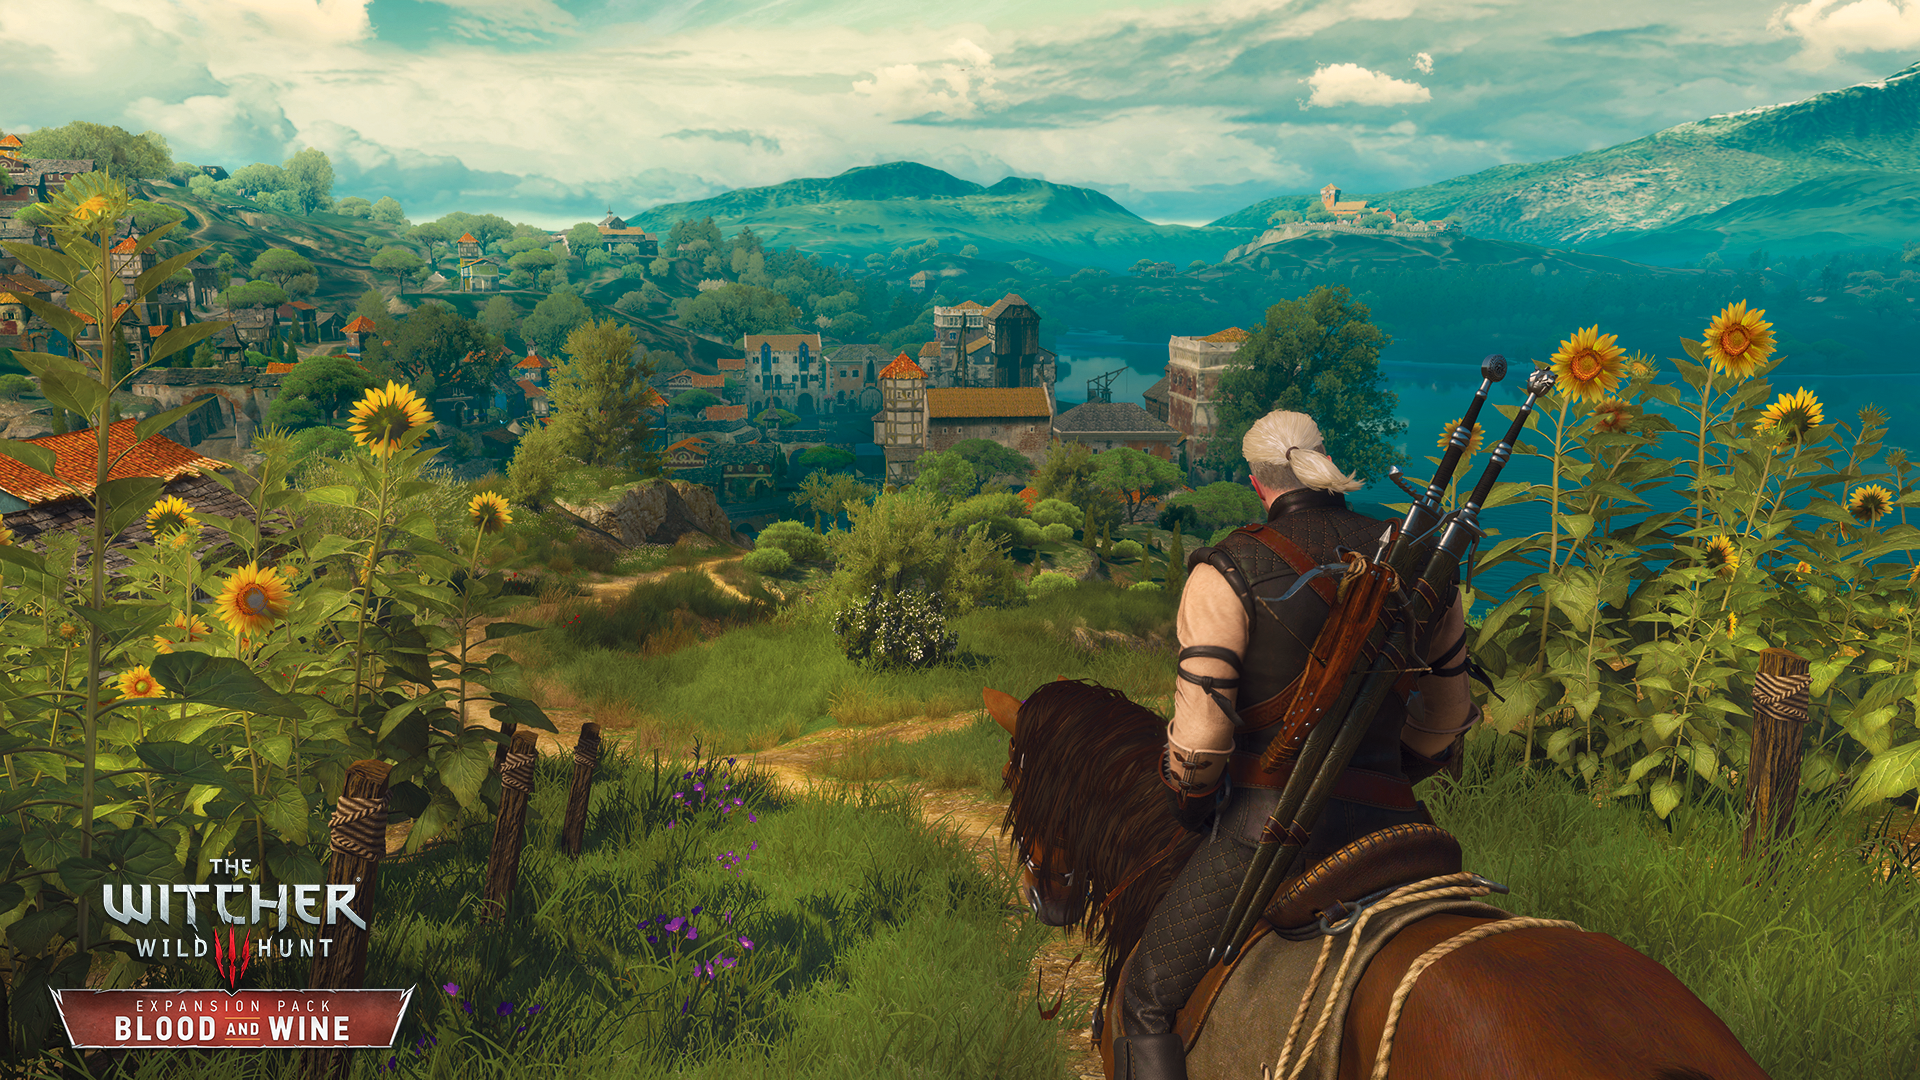 the witcher 3 blood and wine worth it